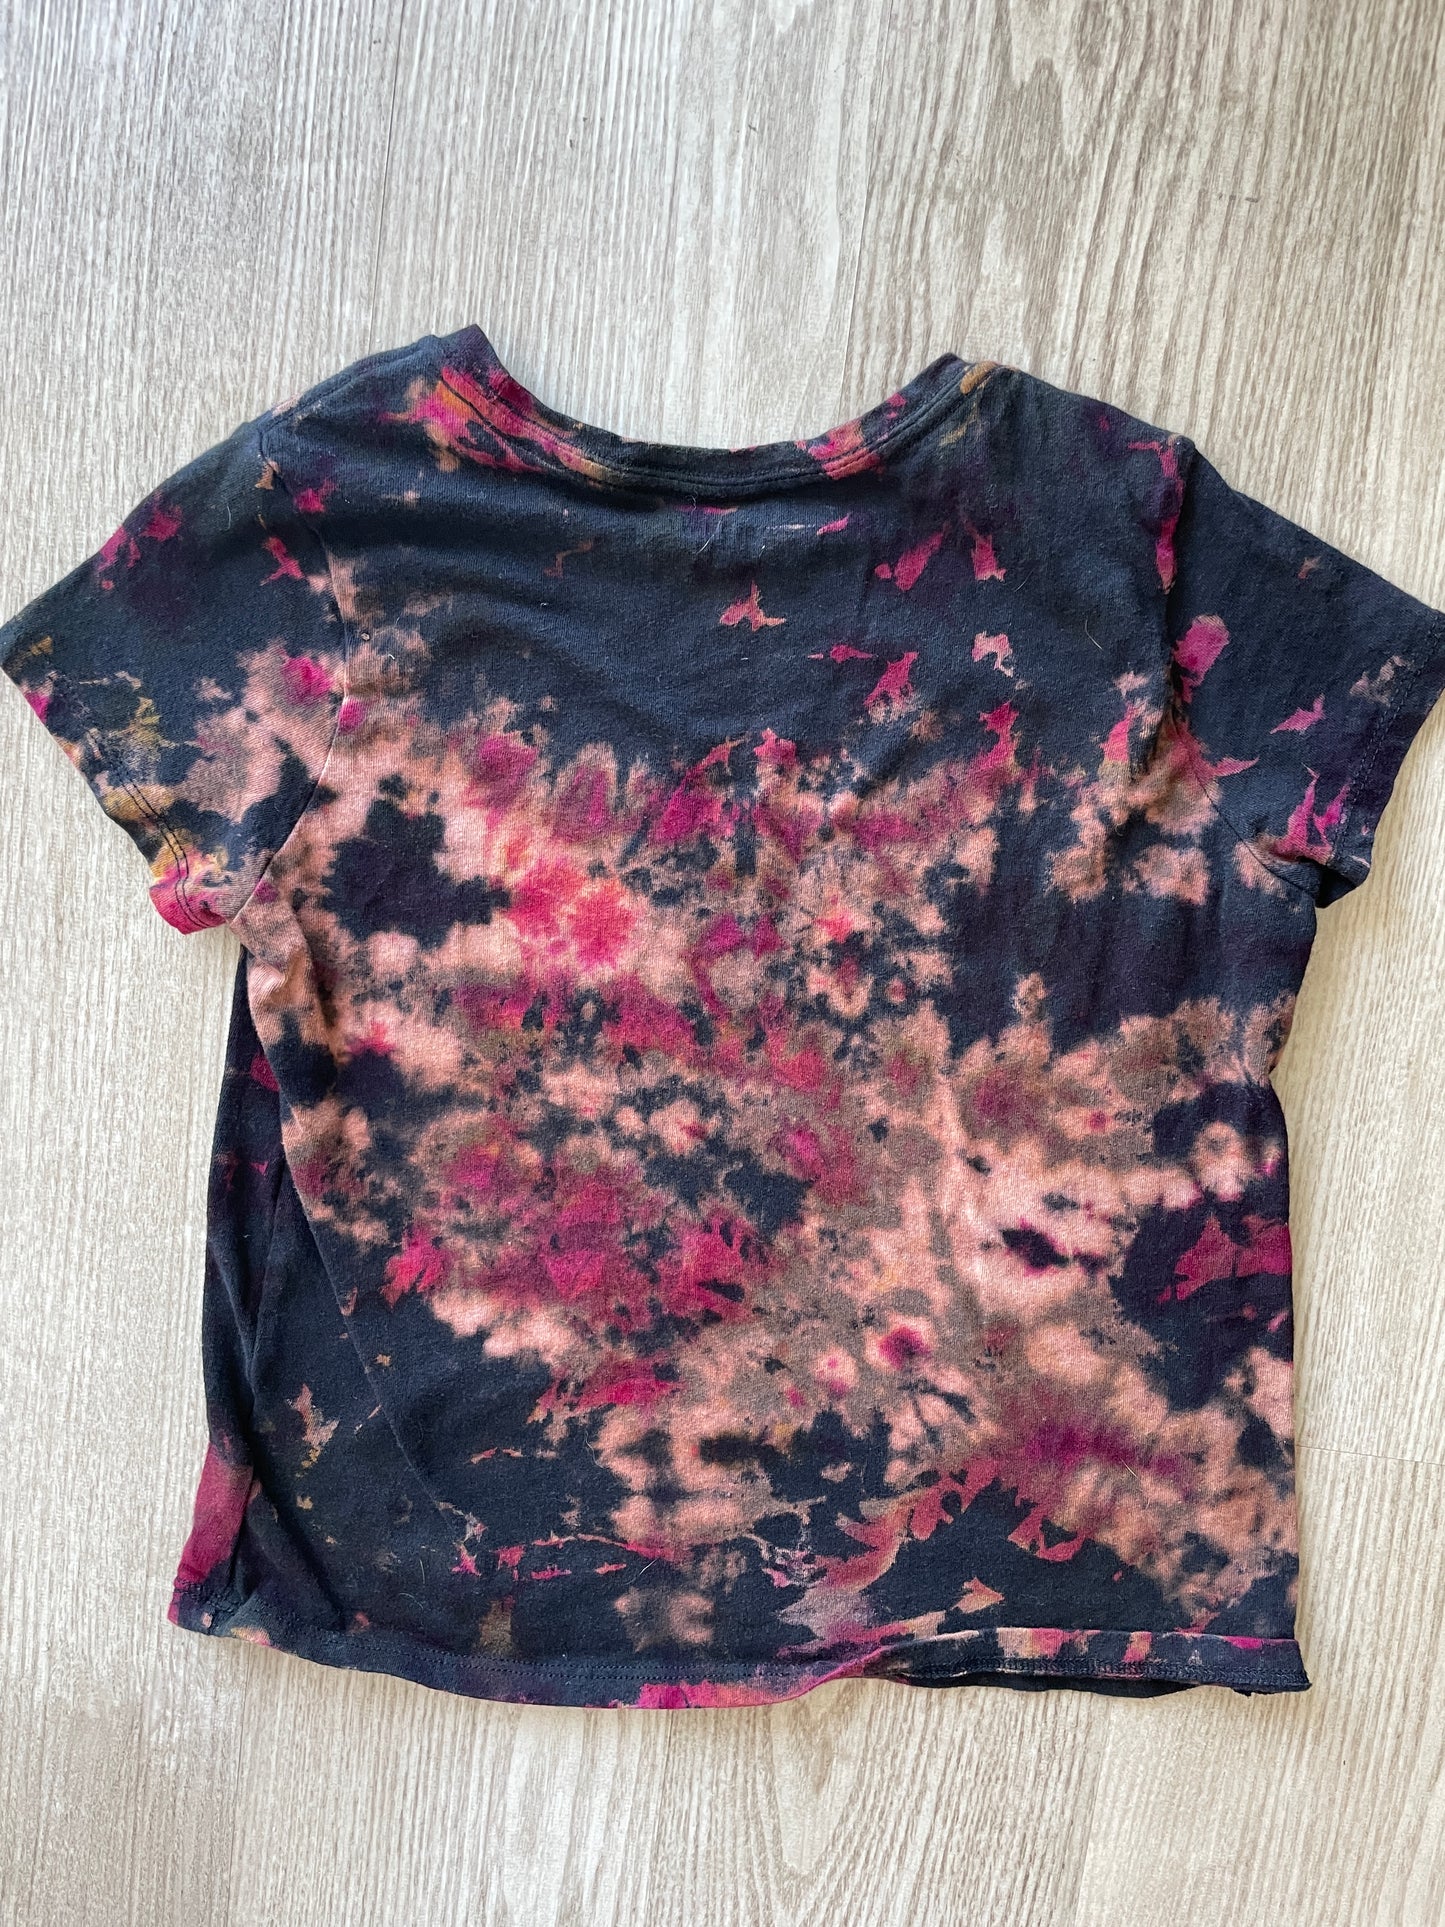 YOUTH GIRLS LARGE Down to Earth Handmade Tie Dye T-Shirt | One-Of-a-Kind Black and Pink Short Sleeve